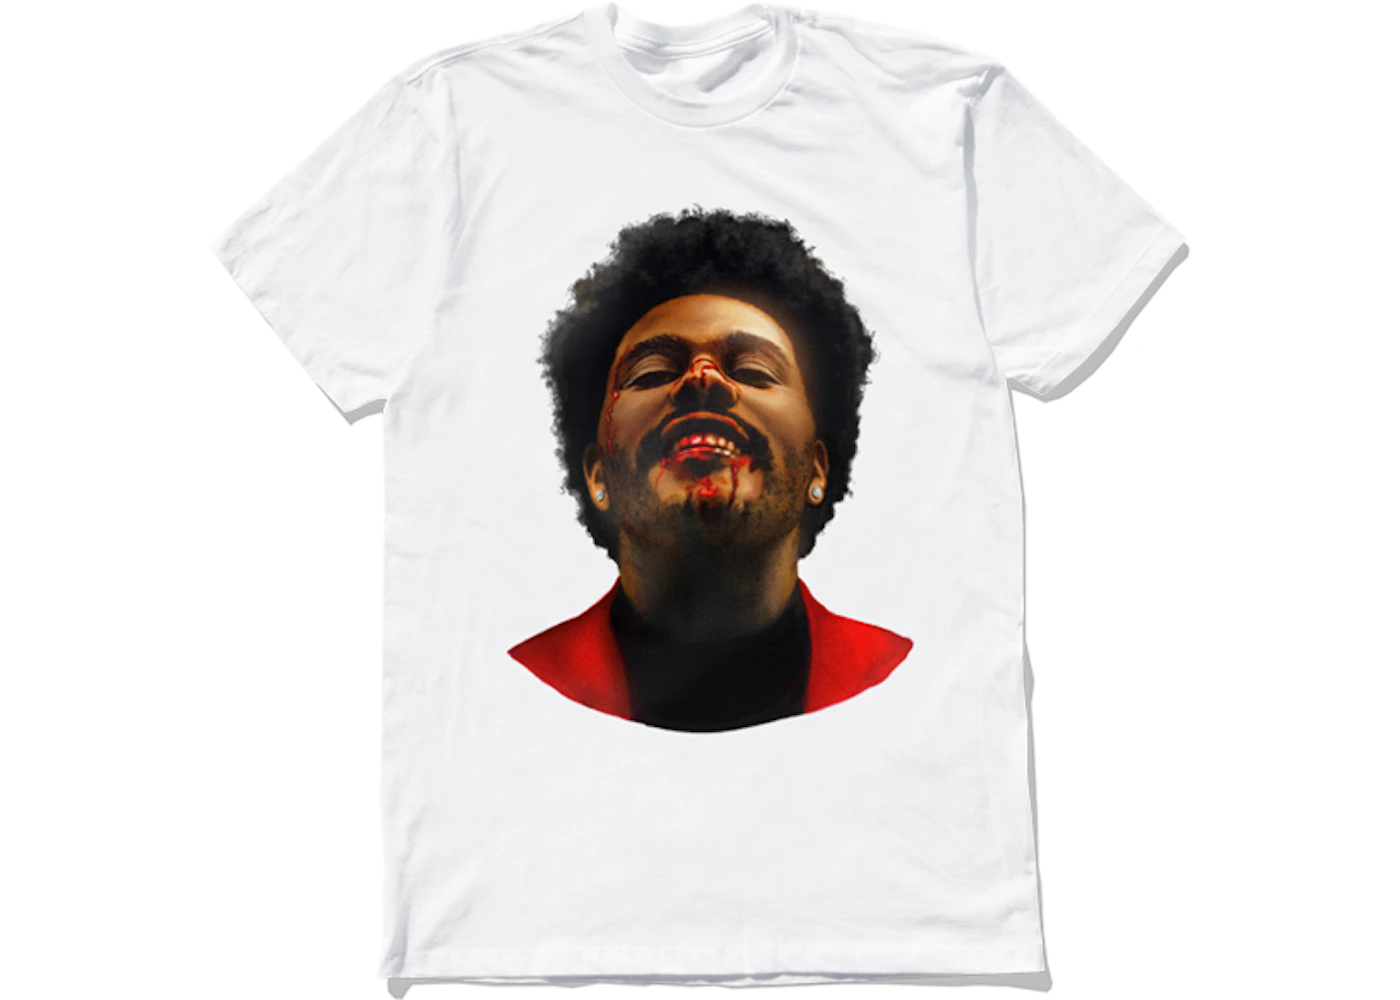 The Weeknd x Readymade After Hours Cover Tee White